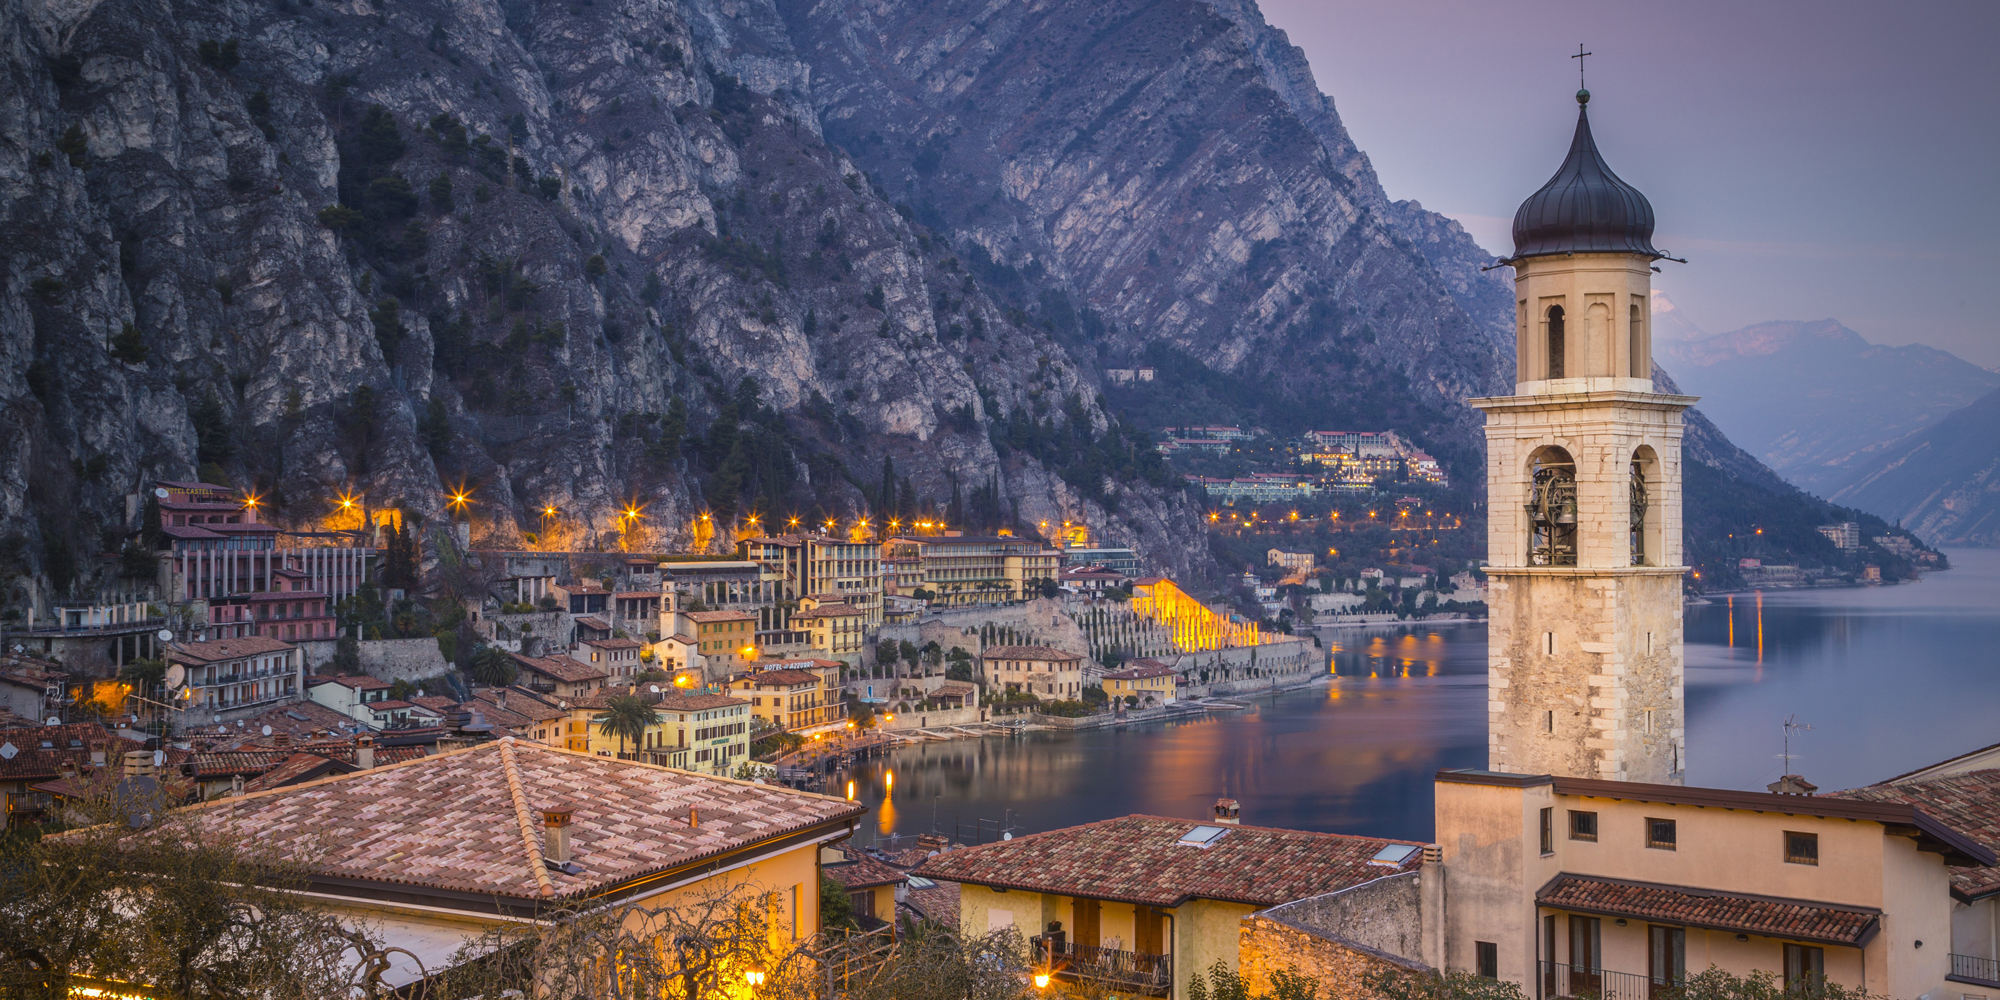 PICTURES OF ITALY: A PLACE OF GREAT BEAUTY